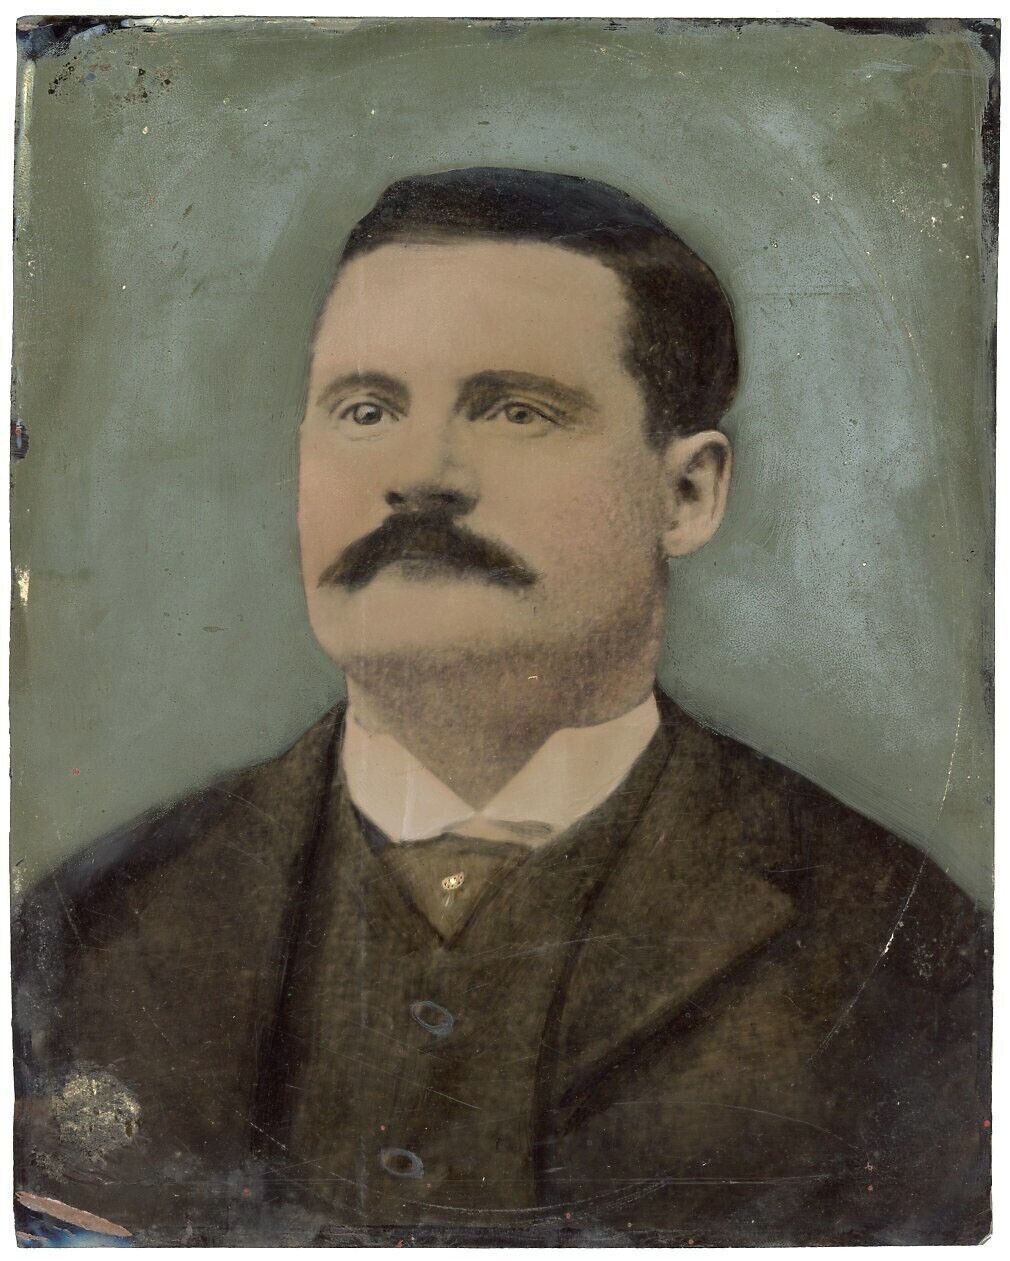 LARGER THAN FULL WHOLE PLATE HAND COLORED TINTYPE PHOTO MUSTACHE MAN LOOKS UP